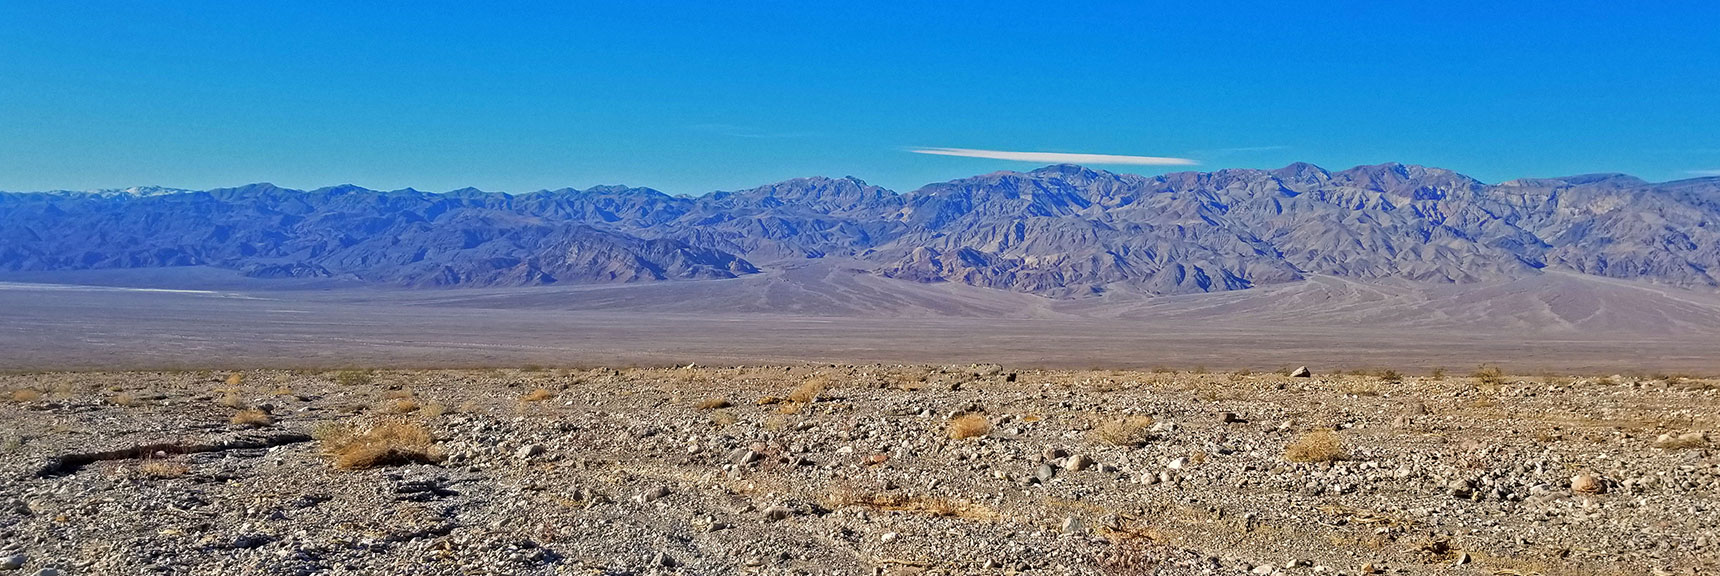 View Down the Wash West Toward the Last Chance Range with its Own Alluvial Fans Marking Canyons | Fall Canyon | Death Valley National Park, California